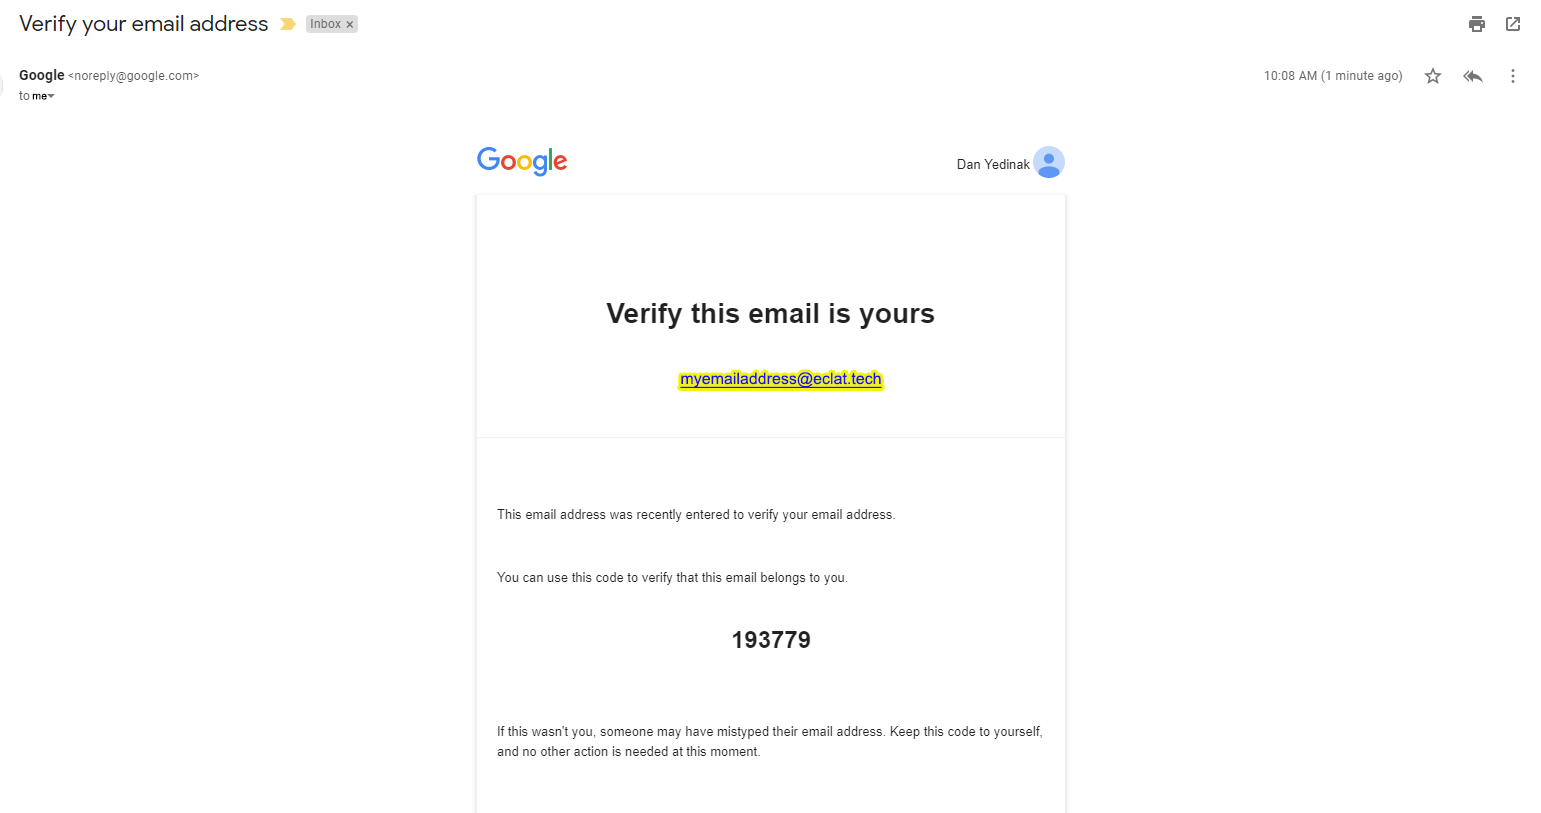 Google Account Creation - the verification Email and Code